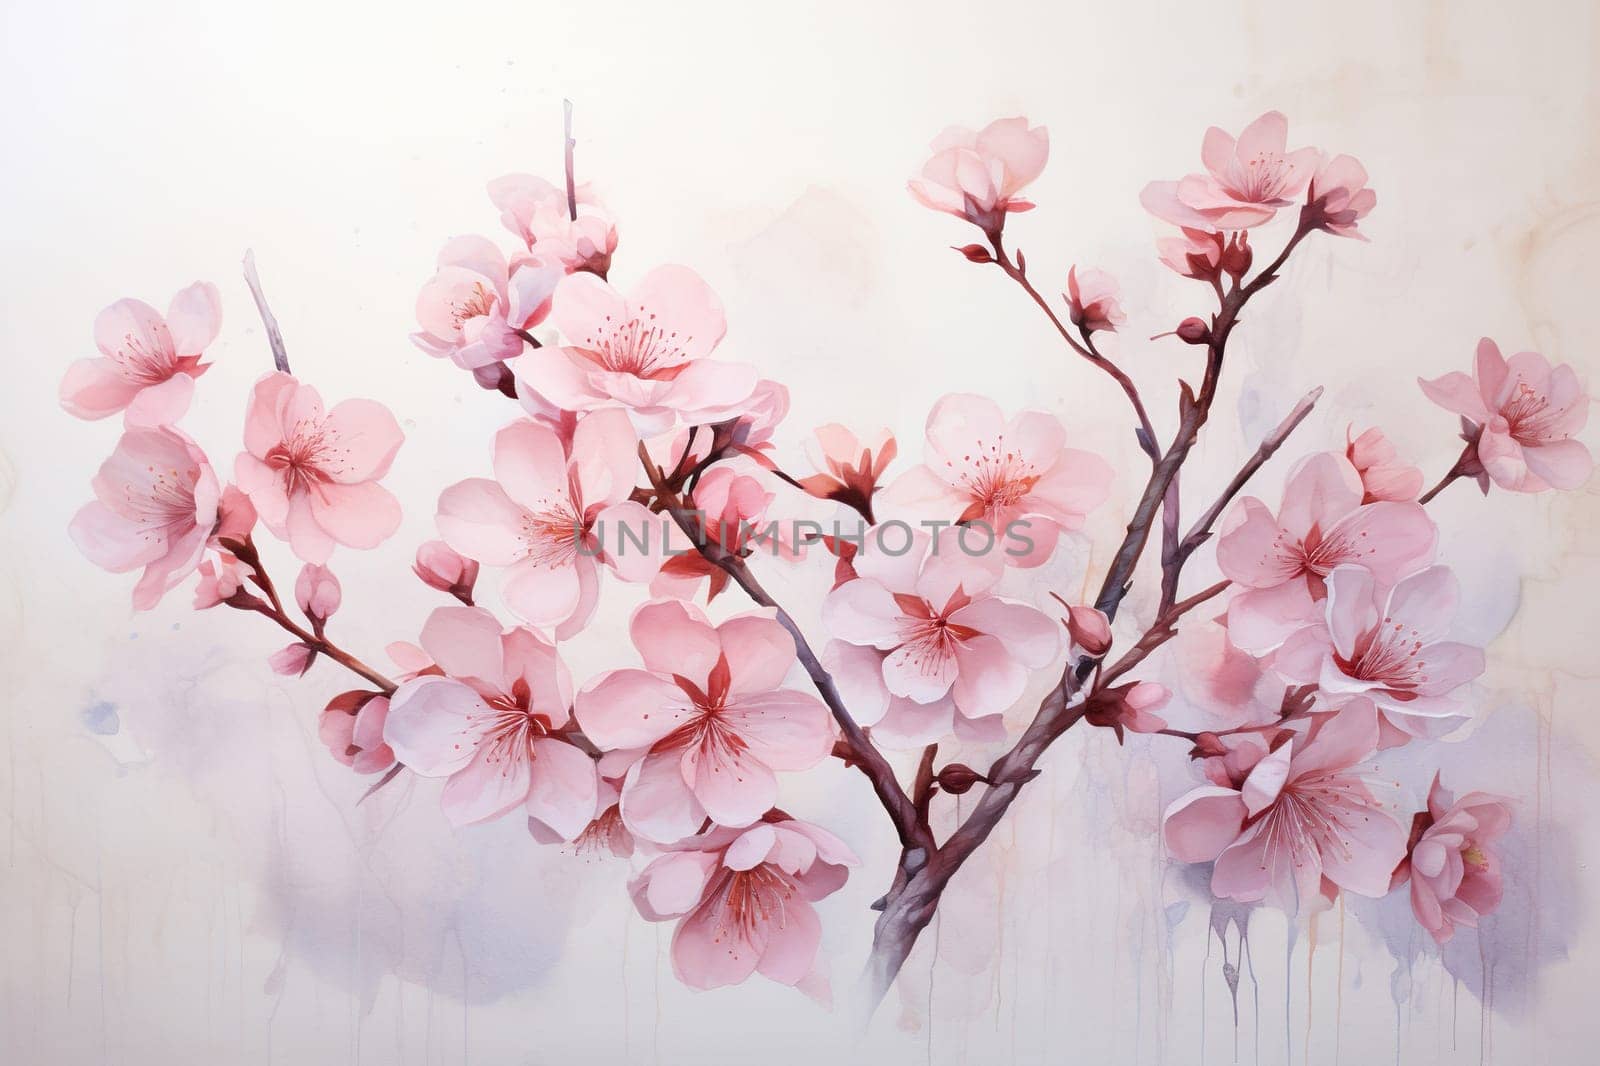 Drawing of sakura on the wall using paints with smudges. Generated by artificial intelligence by Vovmar